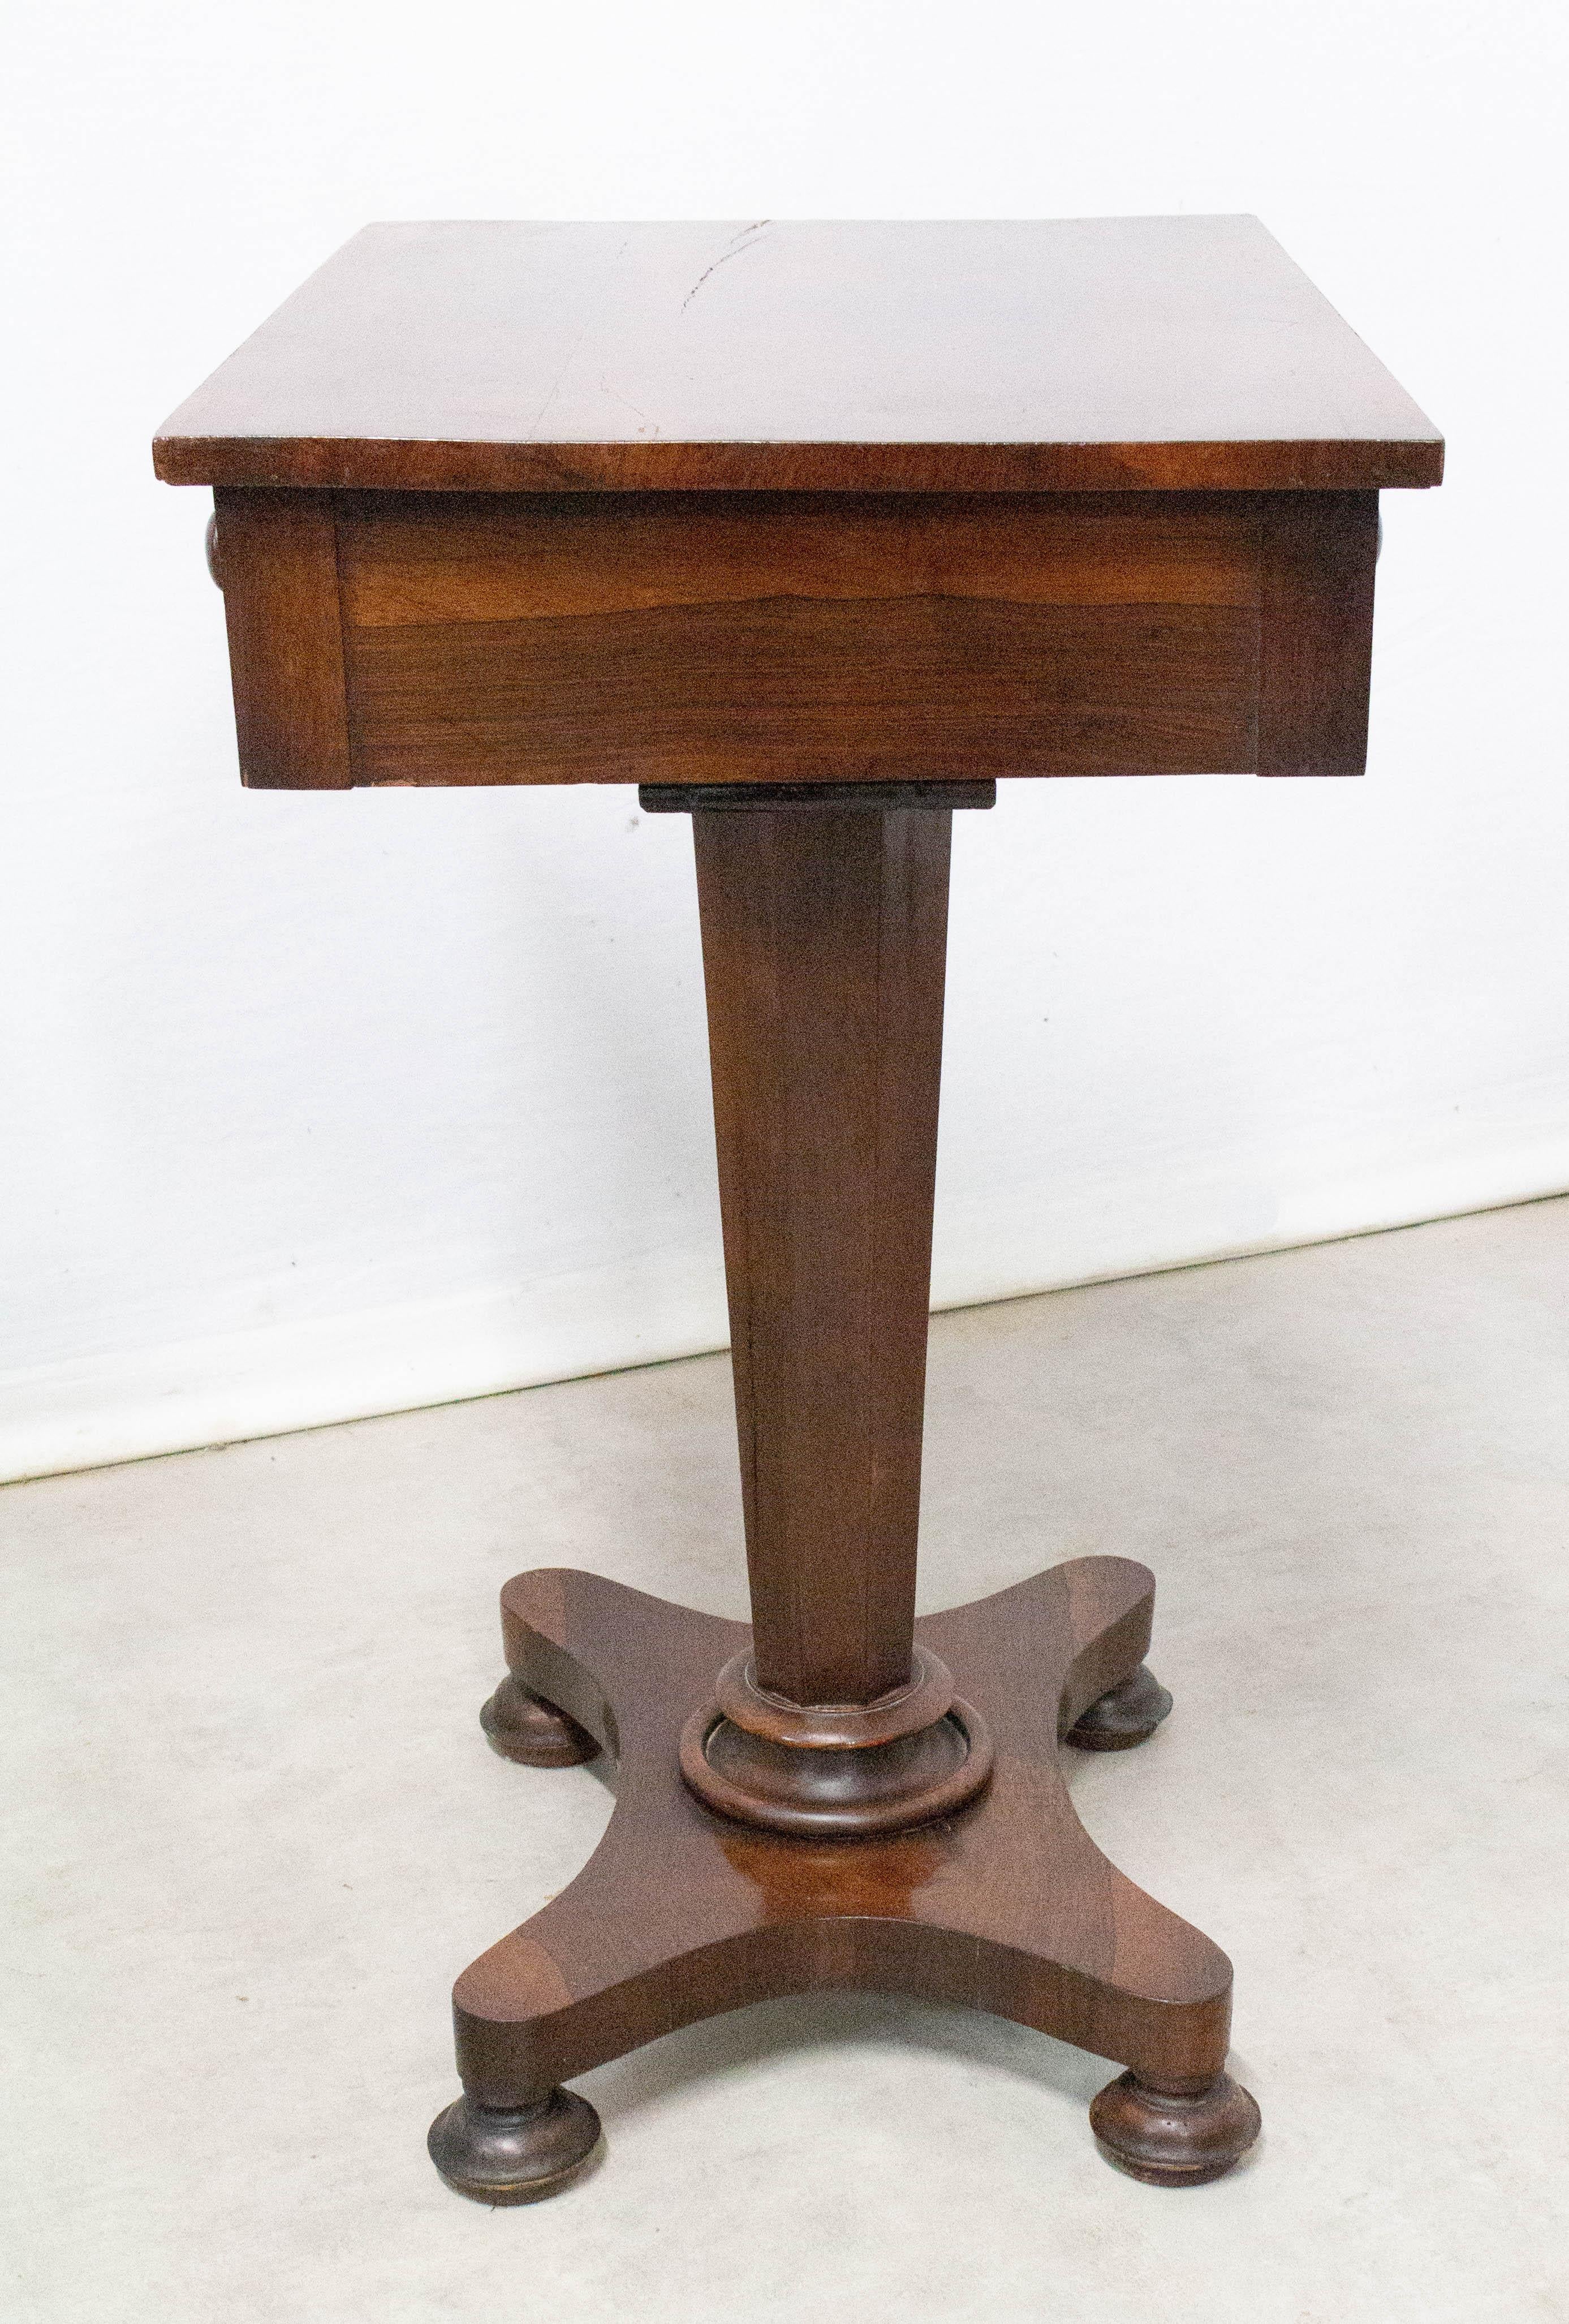 English Victorian Sellette Side Table, Mid-19th Century For Sale 1